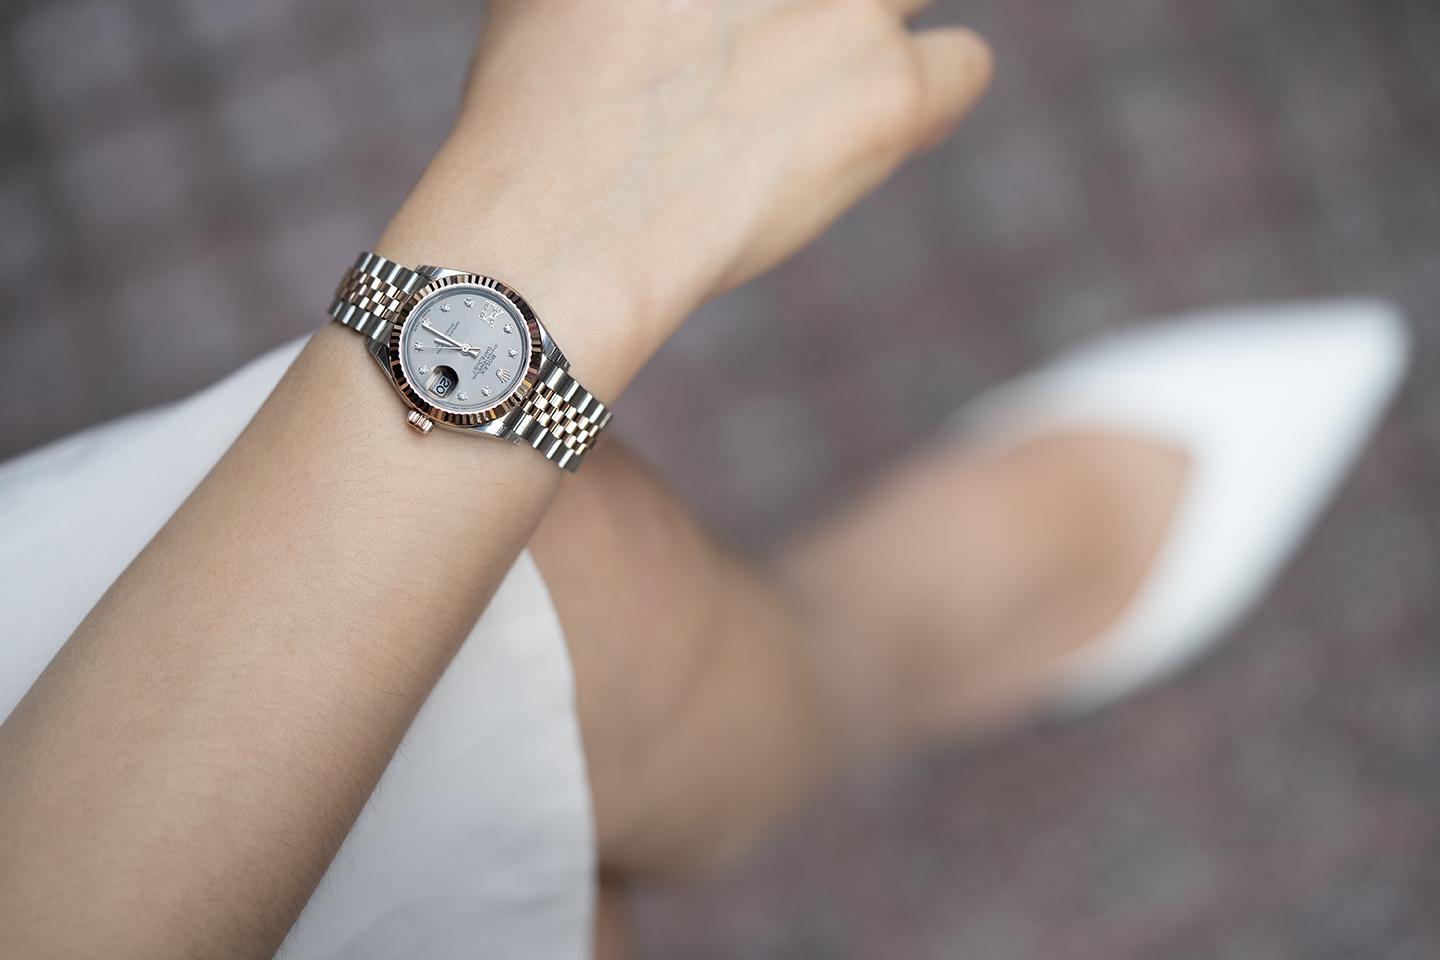 Iconic Rolex Watches for Women - The Watch Company